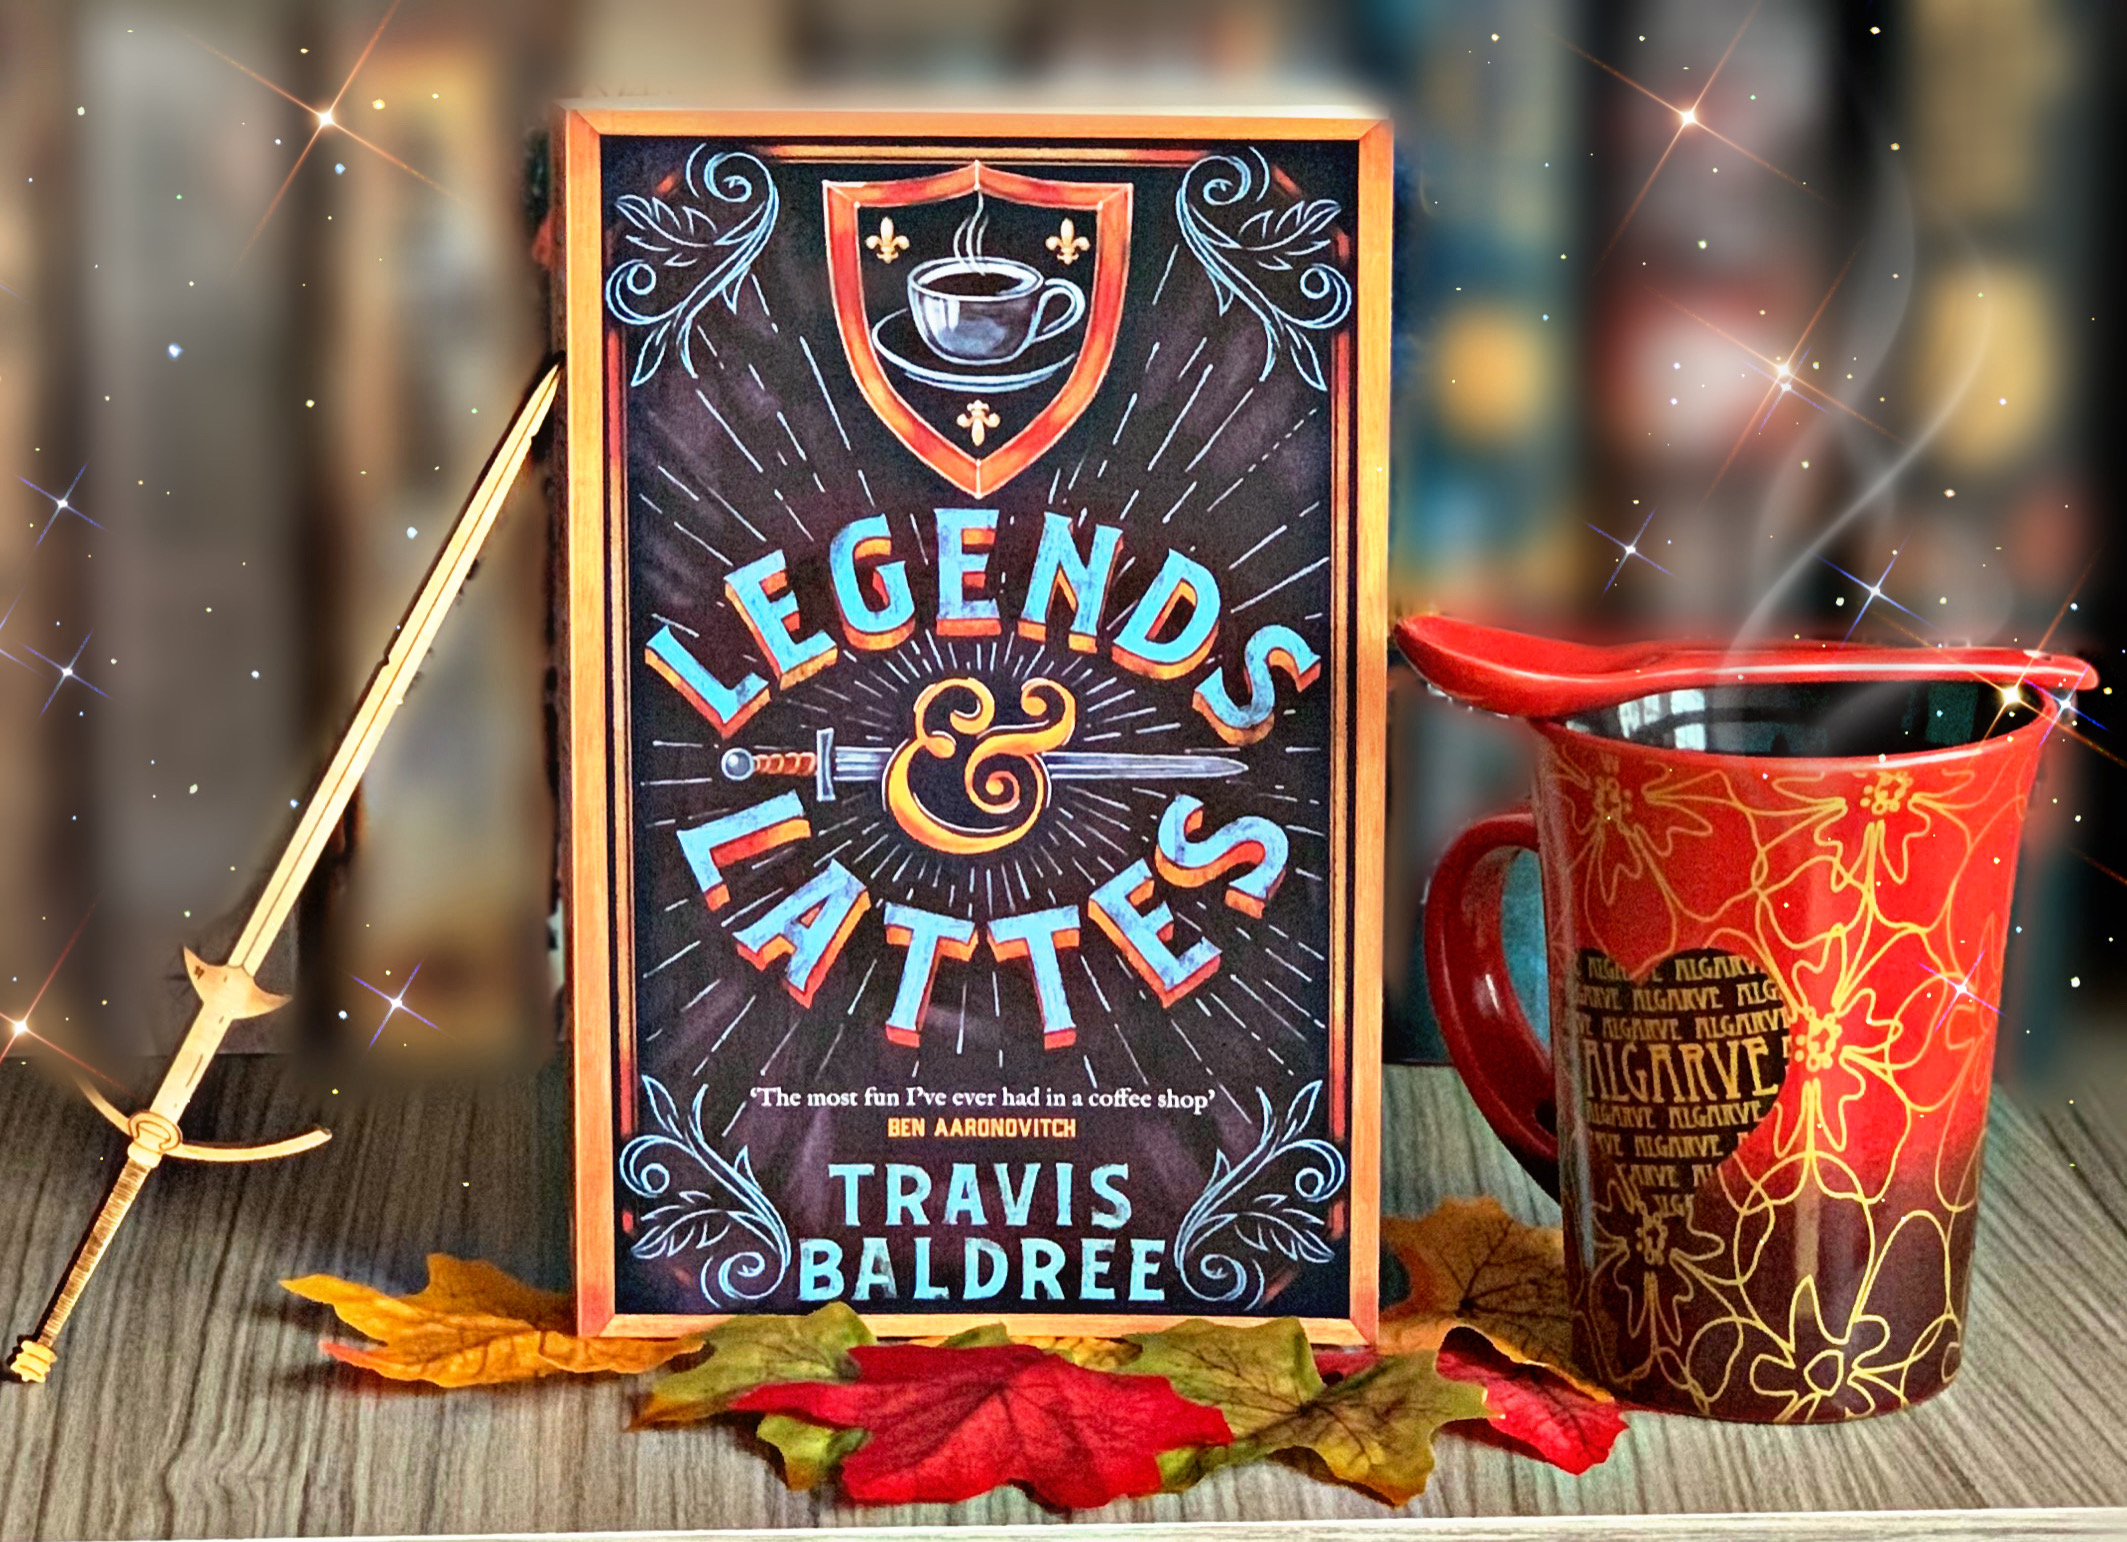 Interview with Travis Baldree (LEGENDS AND LATTES)